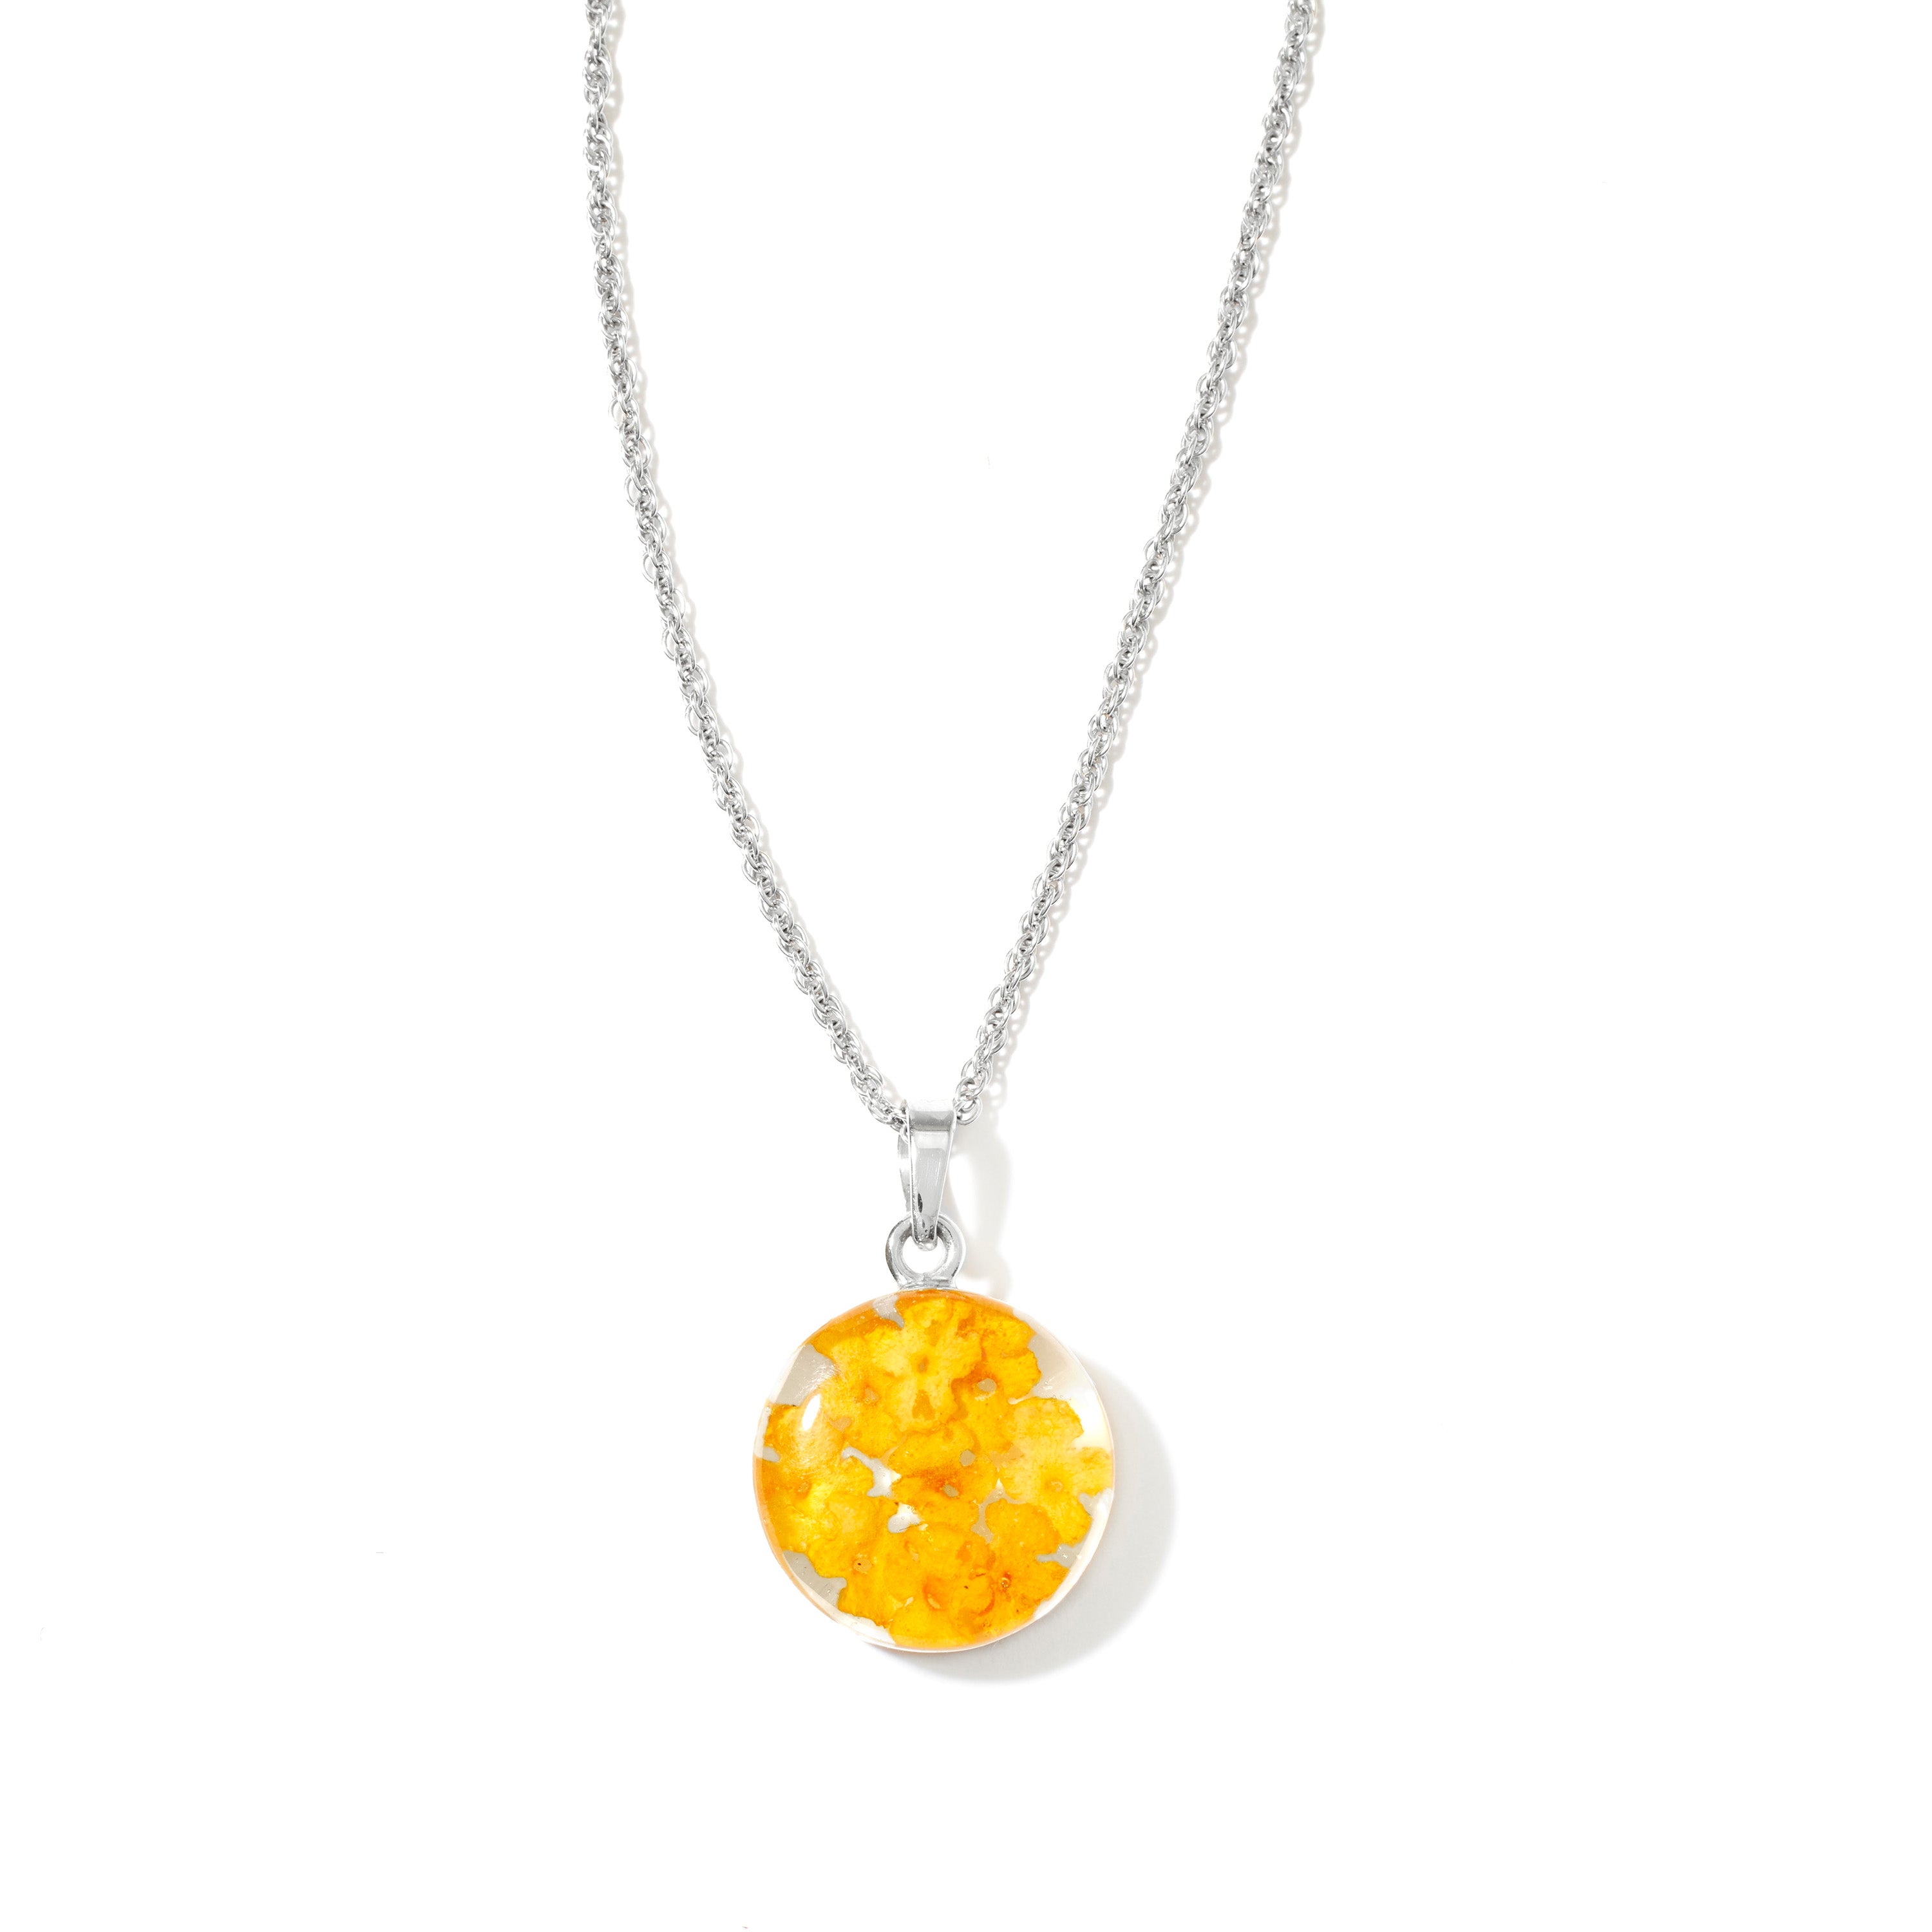 Halo Drop Necklace with Yellow Flowers